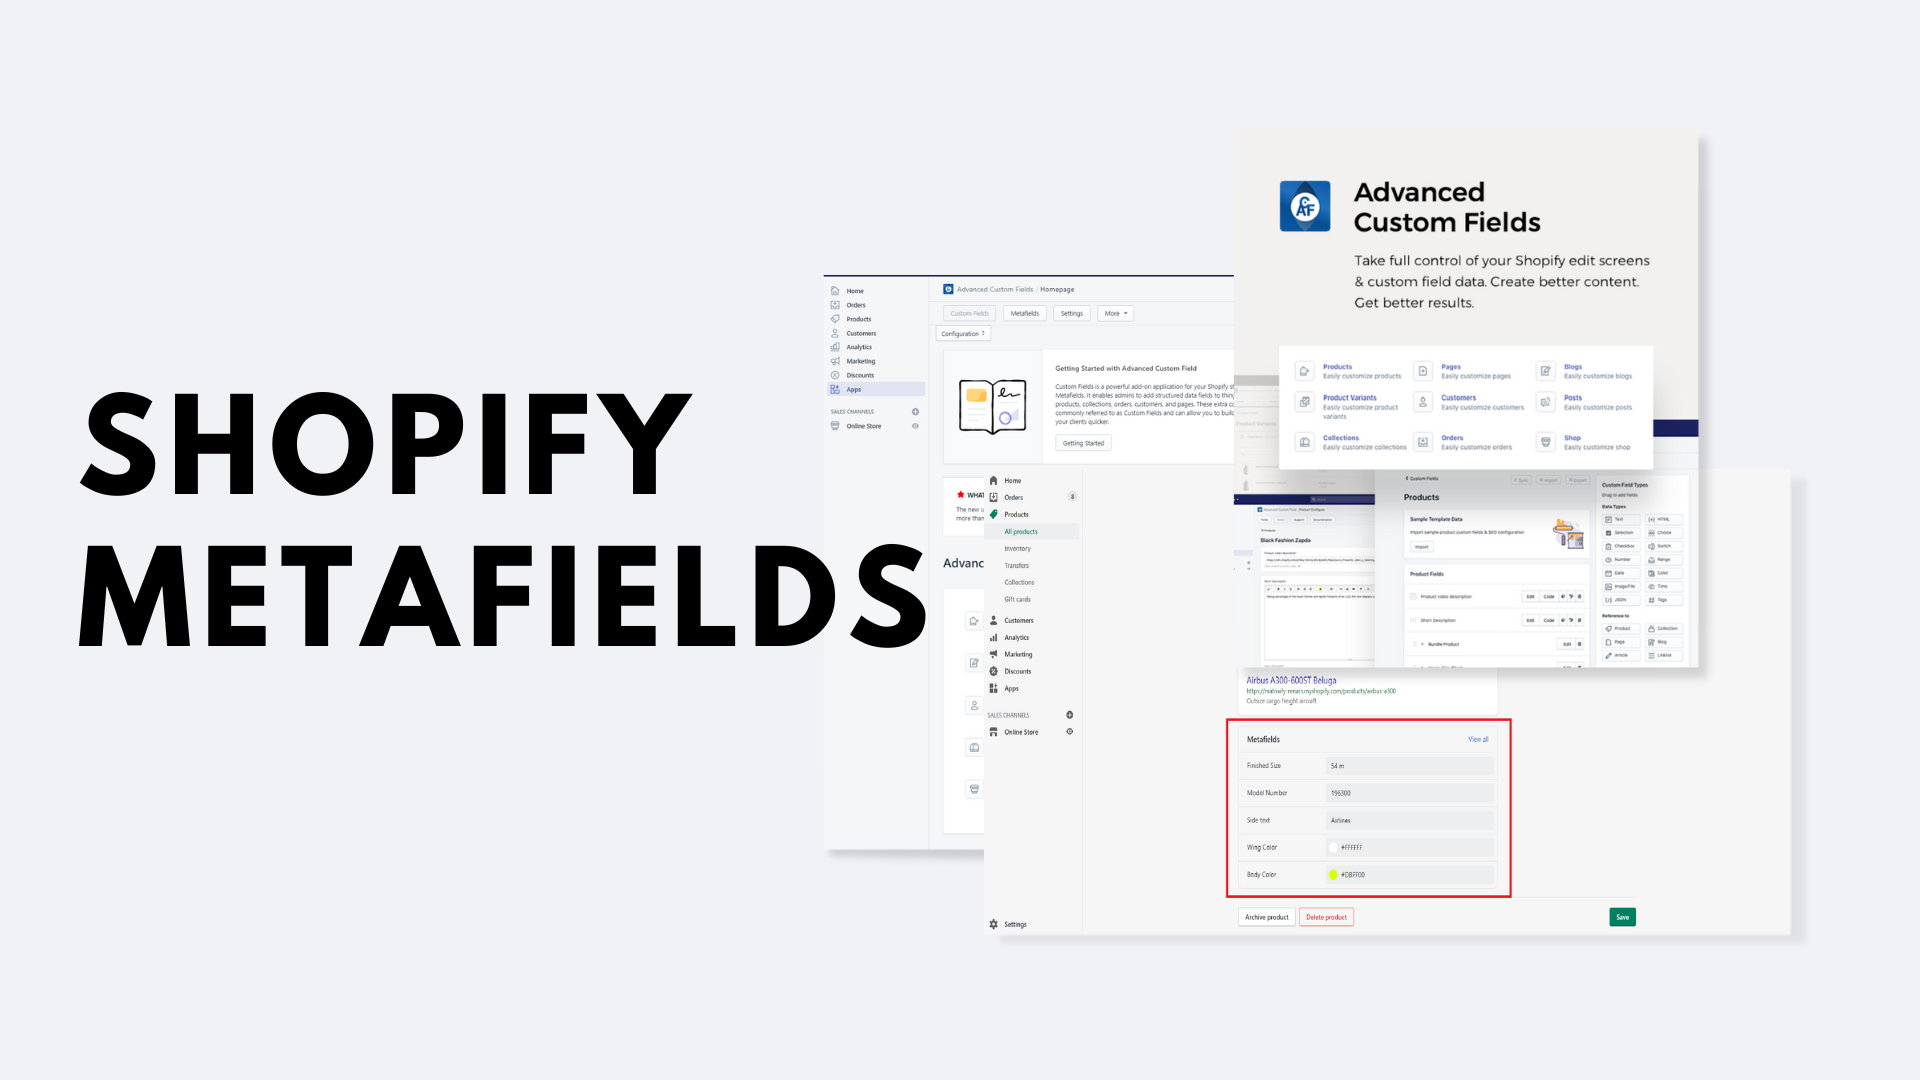 Shopify metafields: Everything you need to know for Shopify 2.0